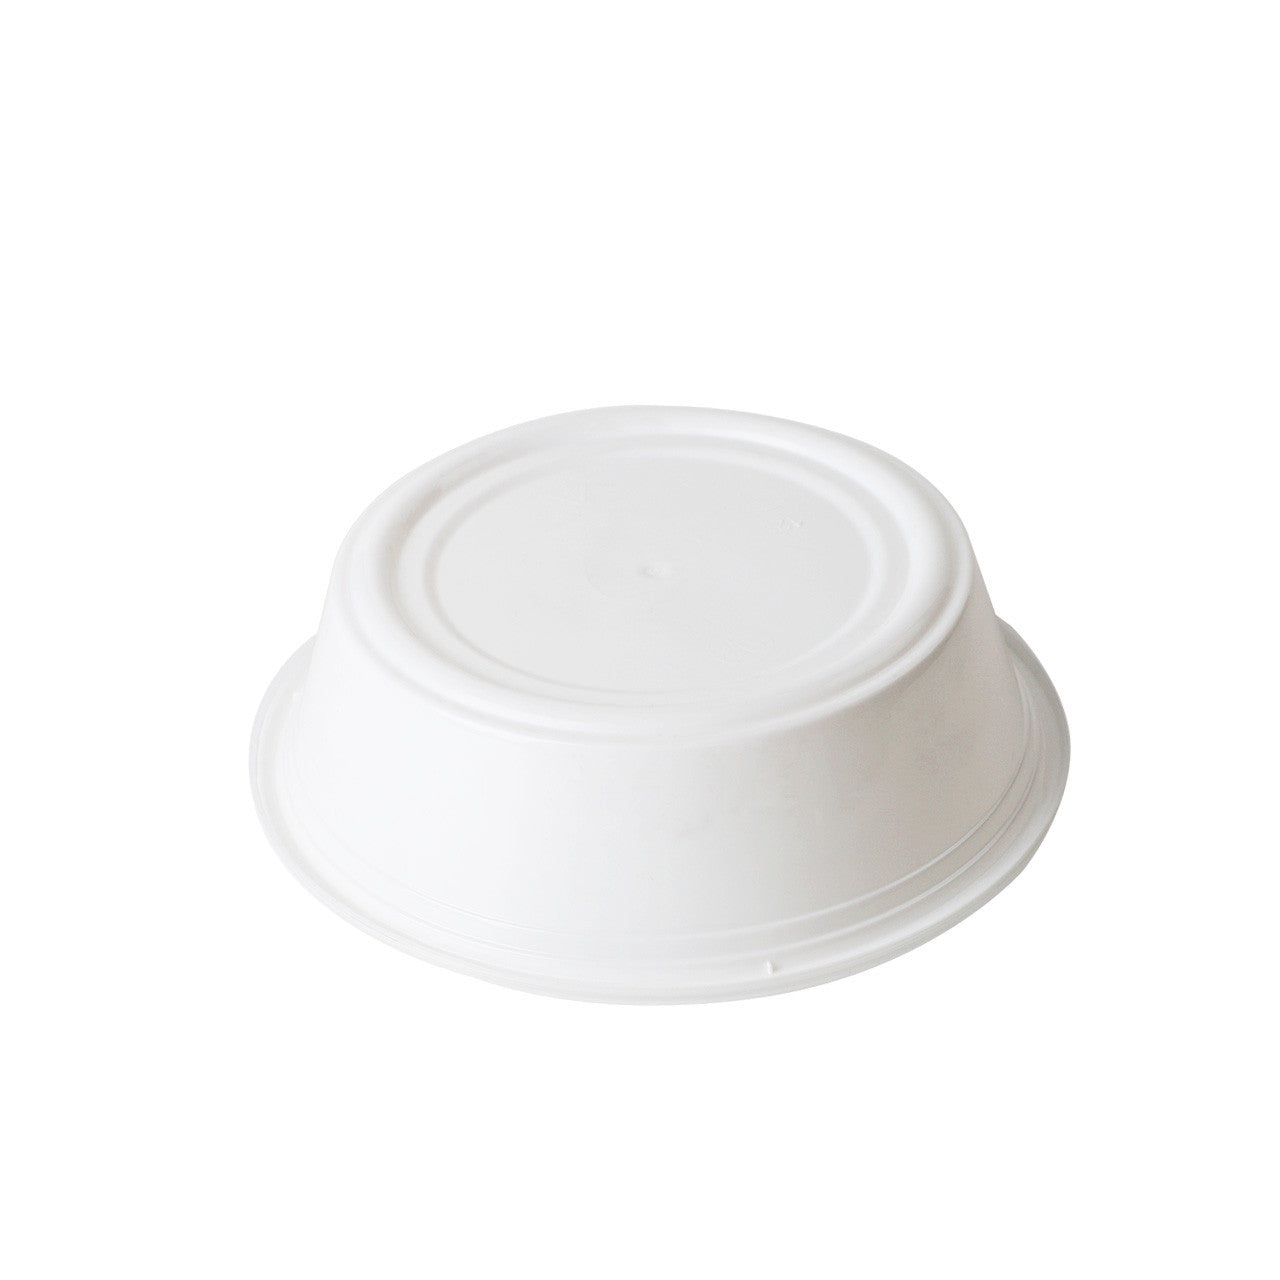 Sample 24 oz White To Go Bowls with Lids Disposable